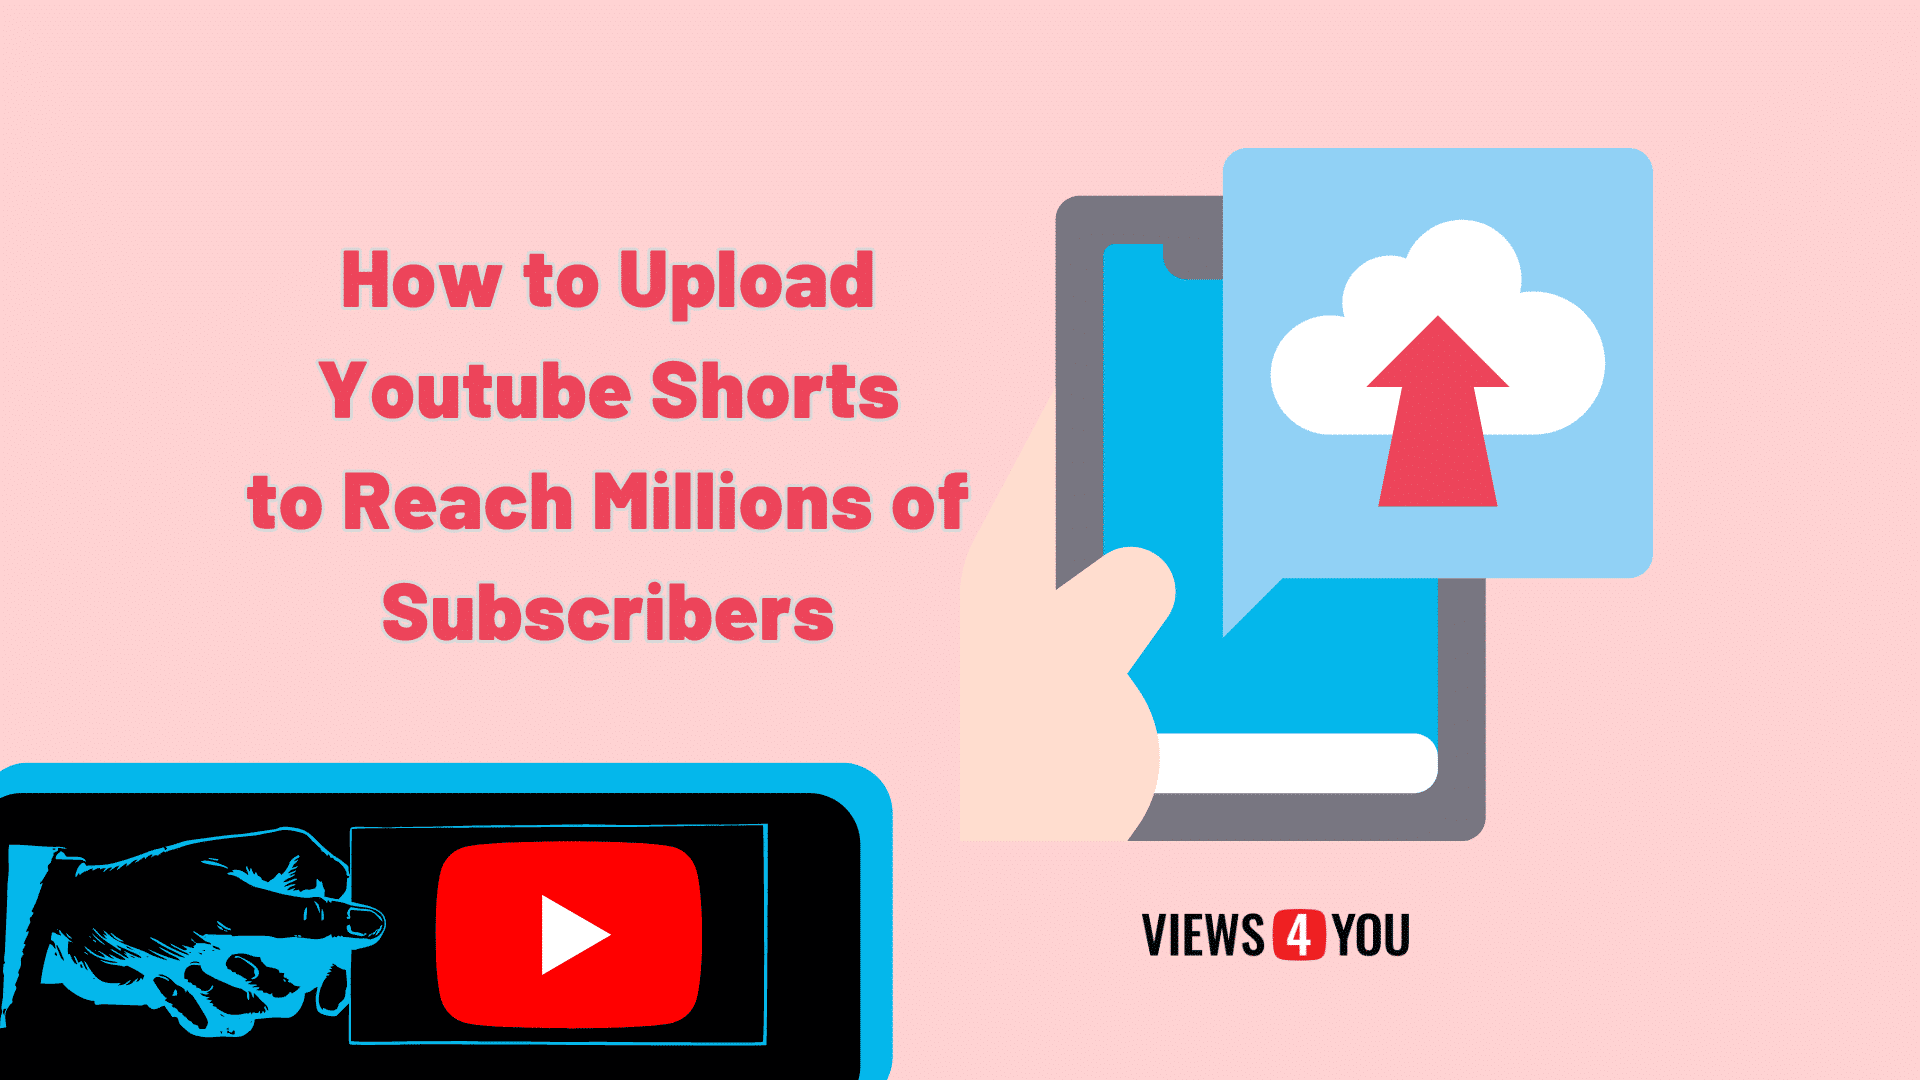 How to Upload Youtube Shorts to Reach Millions of Subscribers